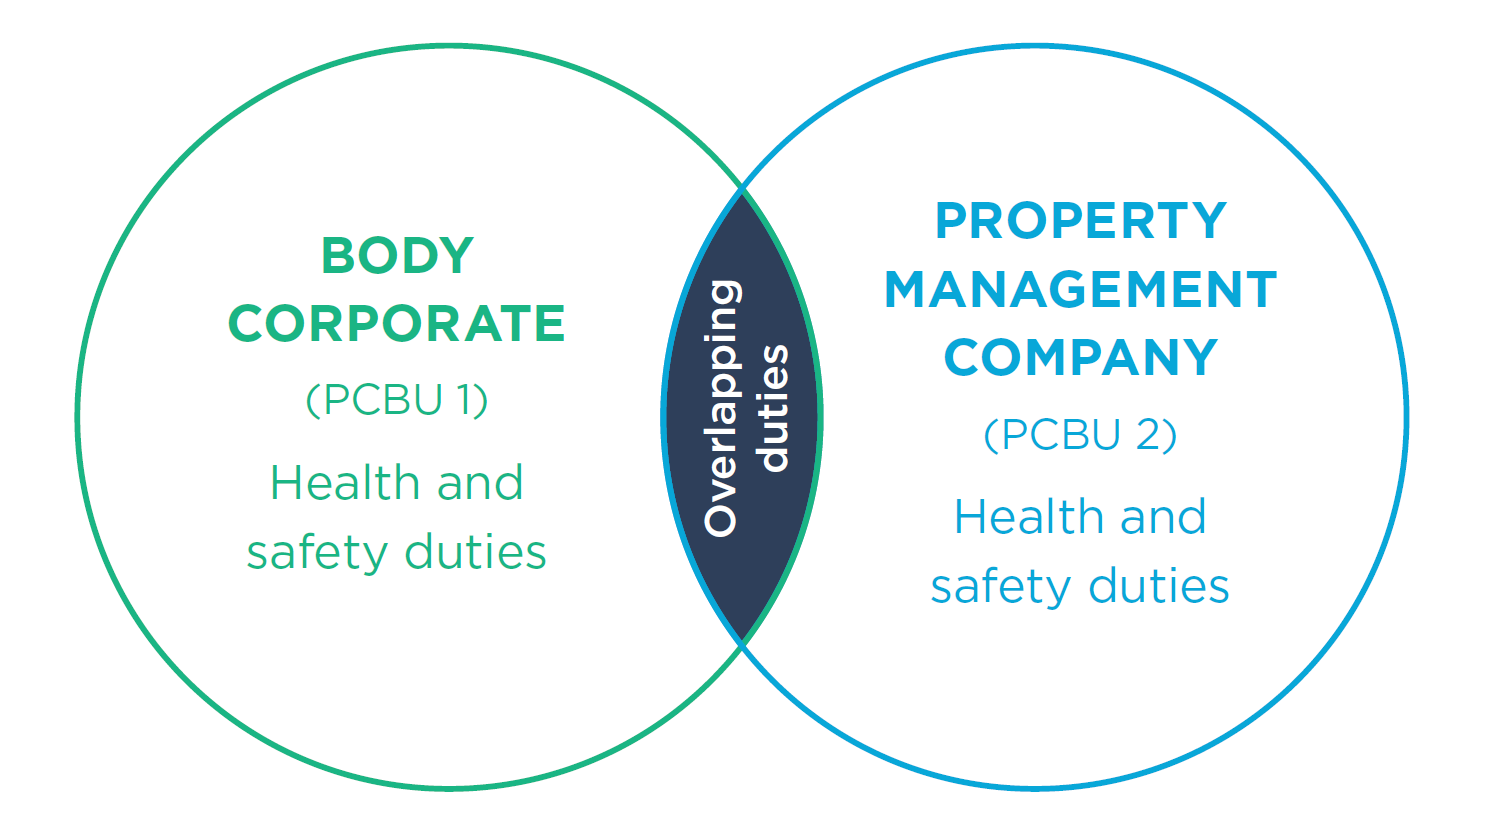 [image] venn diagram of overlapping duties for body corporate and property management